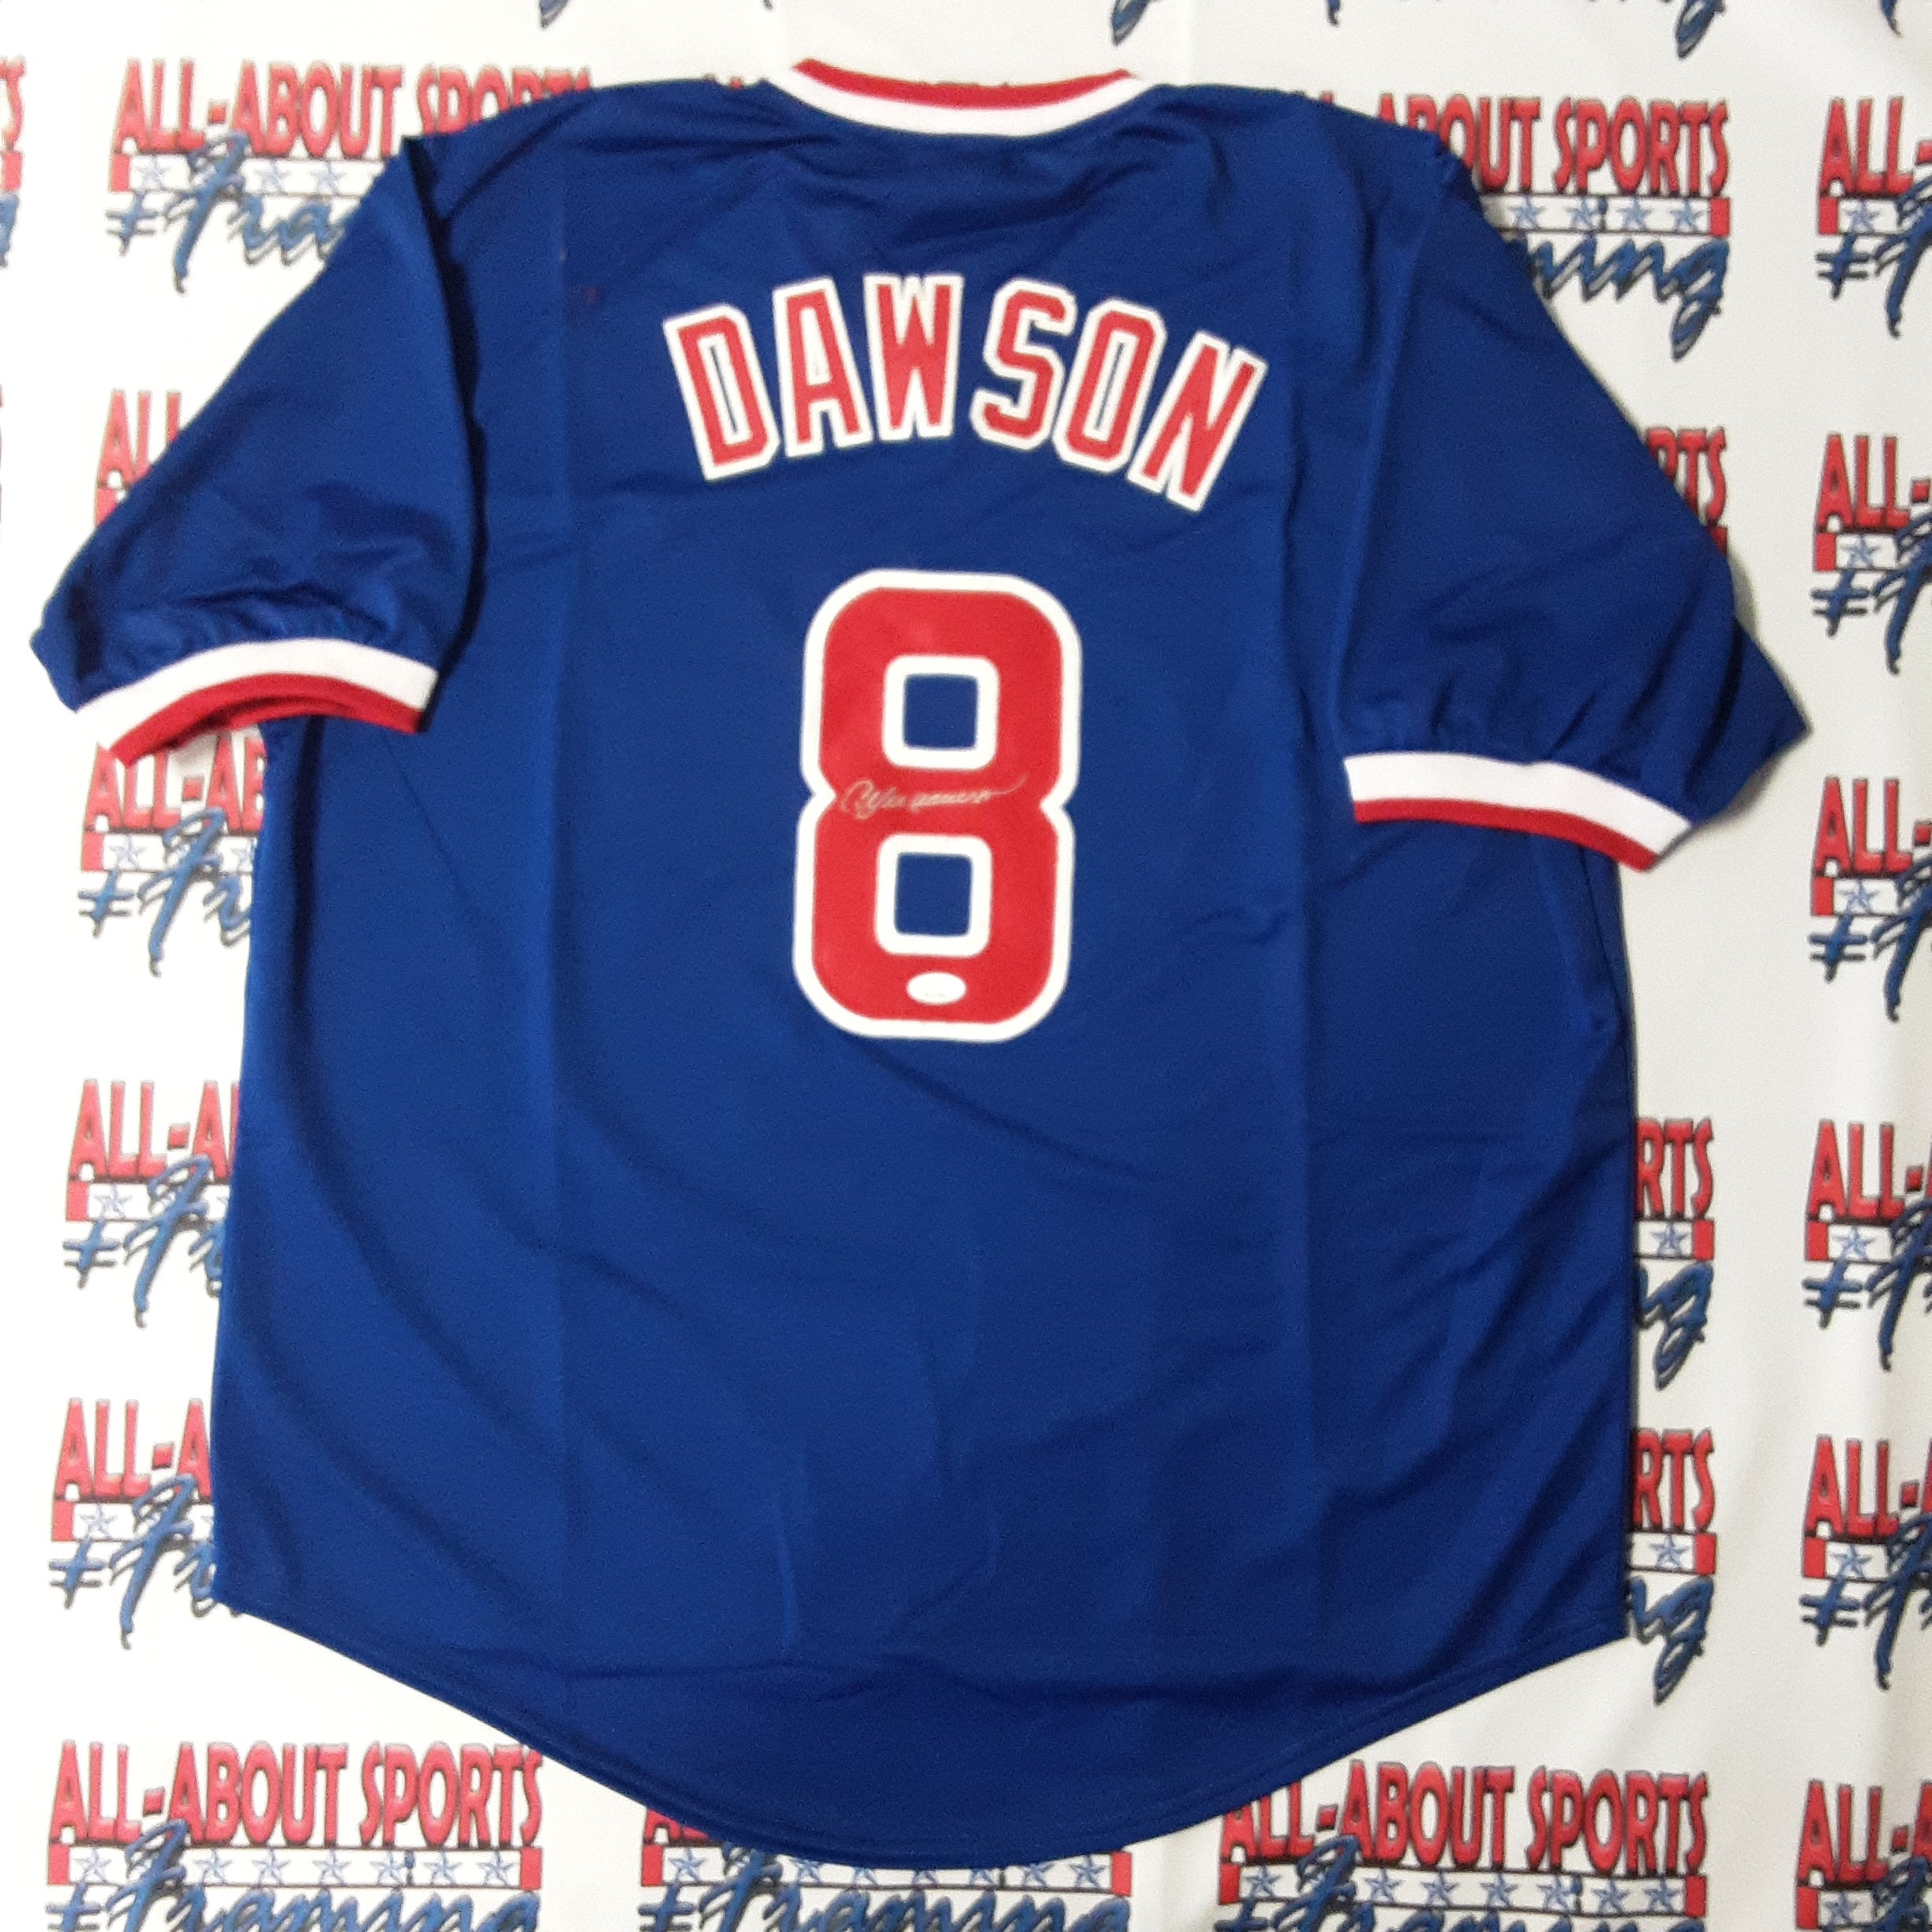 Andre Dawson Autographed Jersey - Replica MVP 87 Note